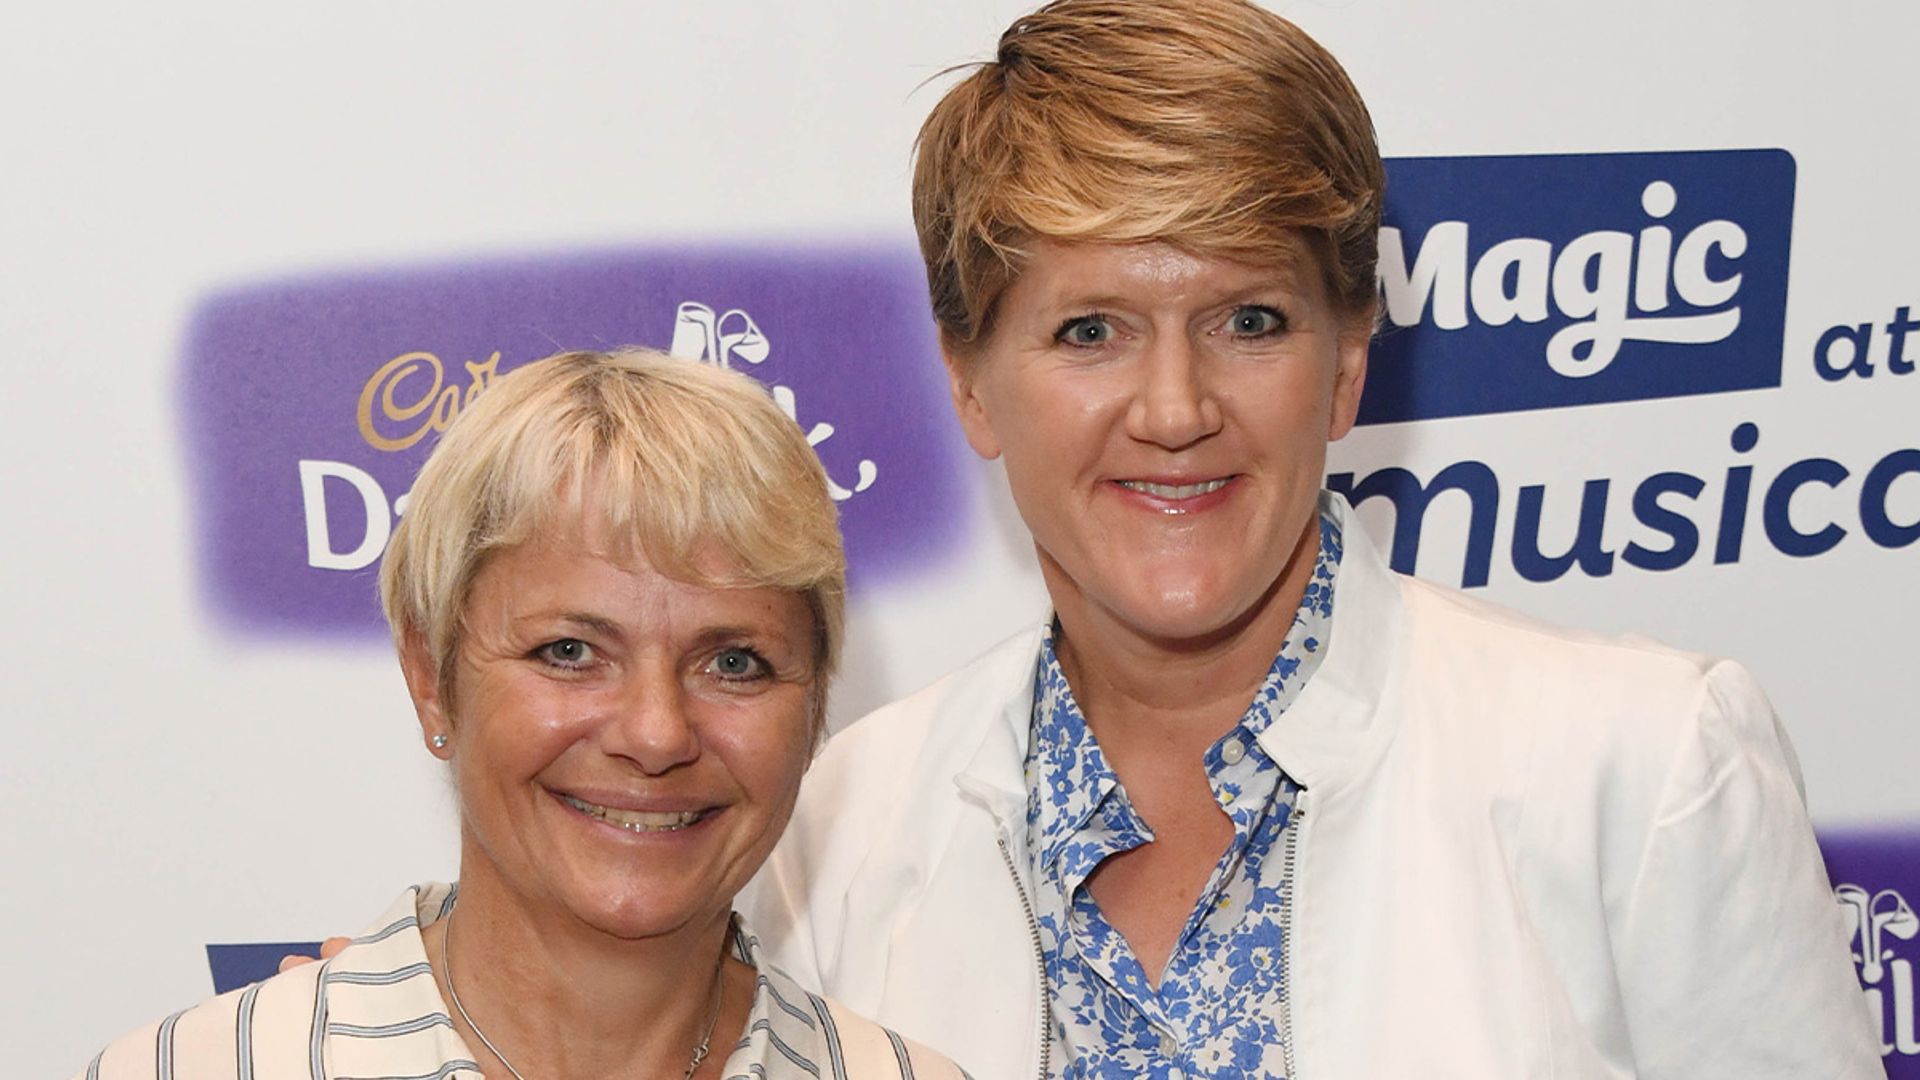 Clare Balding's wife Alice Arnold: everything you need to know